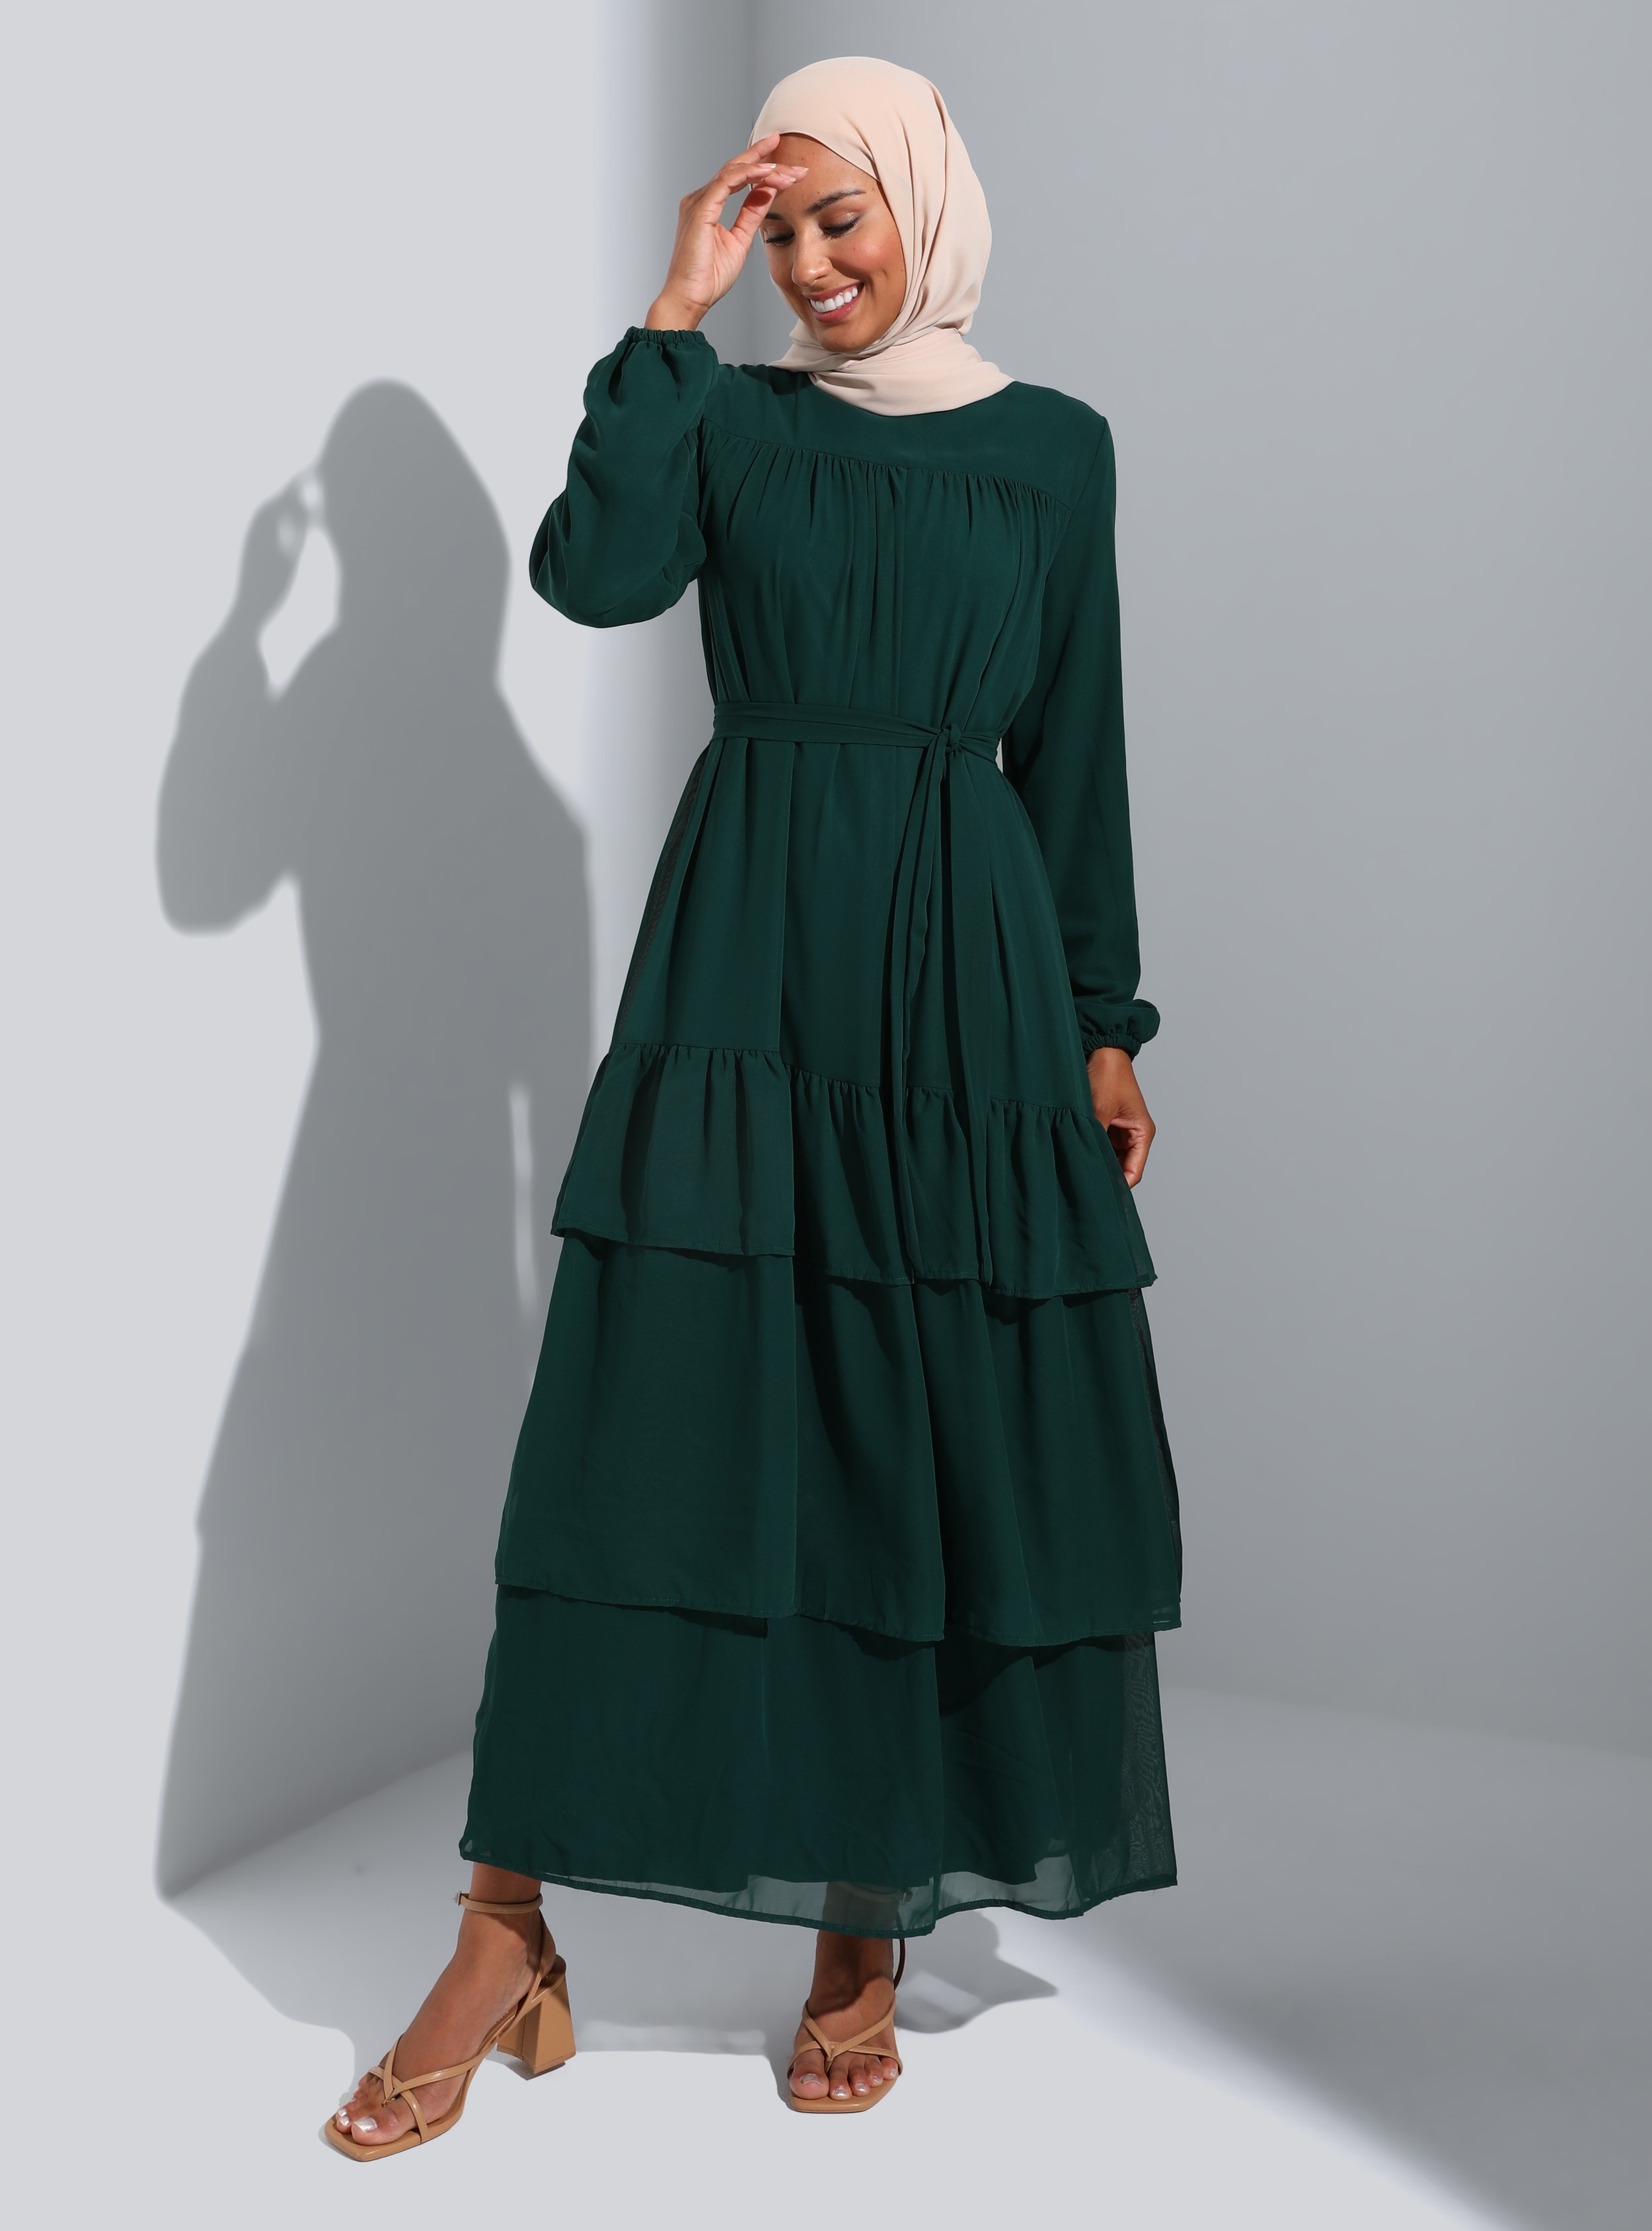 Petrol - Crew neck - Fully Lined - Modest Dress